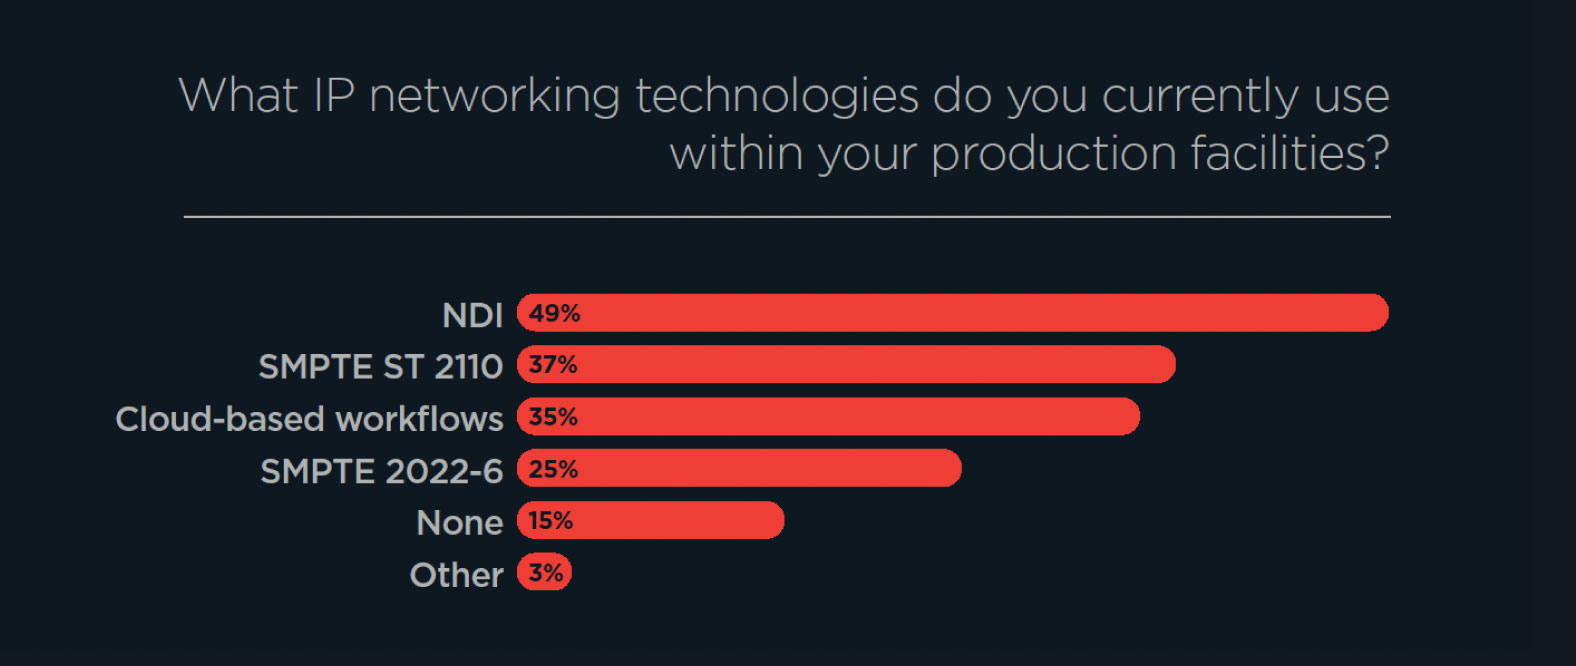 What IP networking technologies do you currently use within your production facilities?